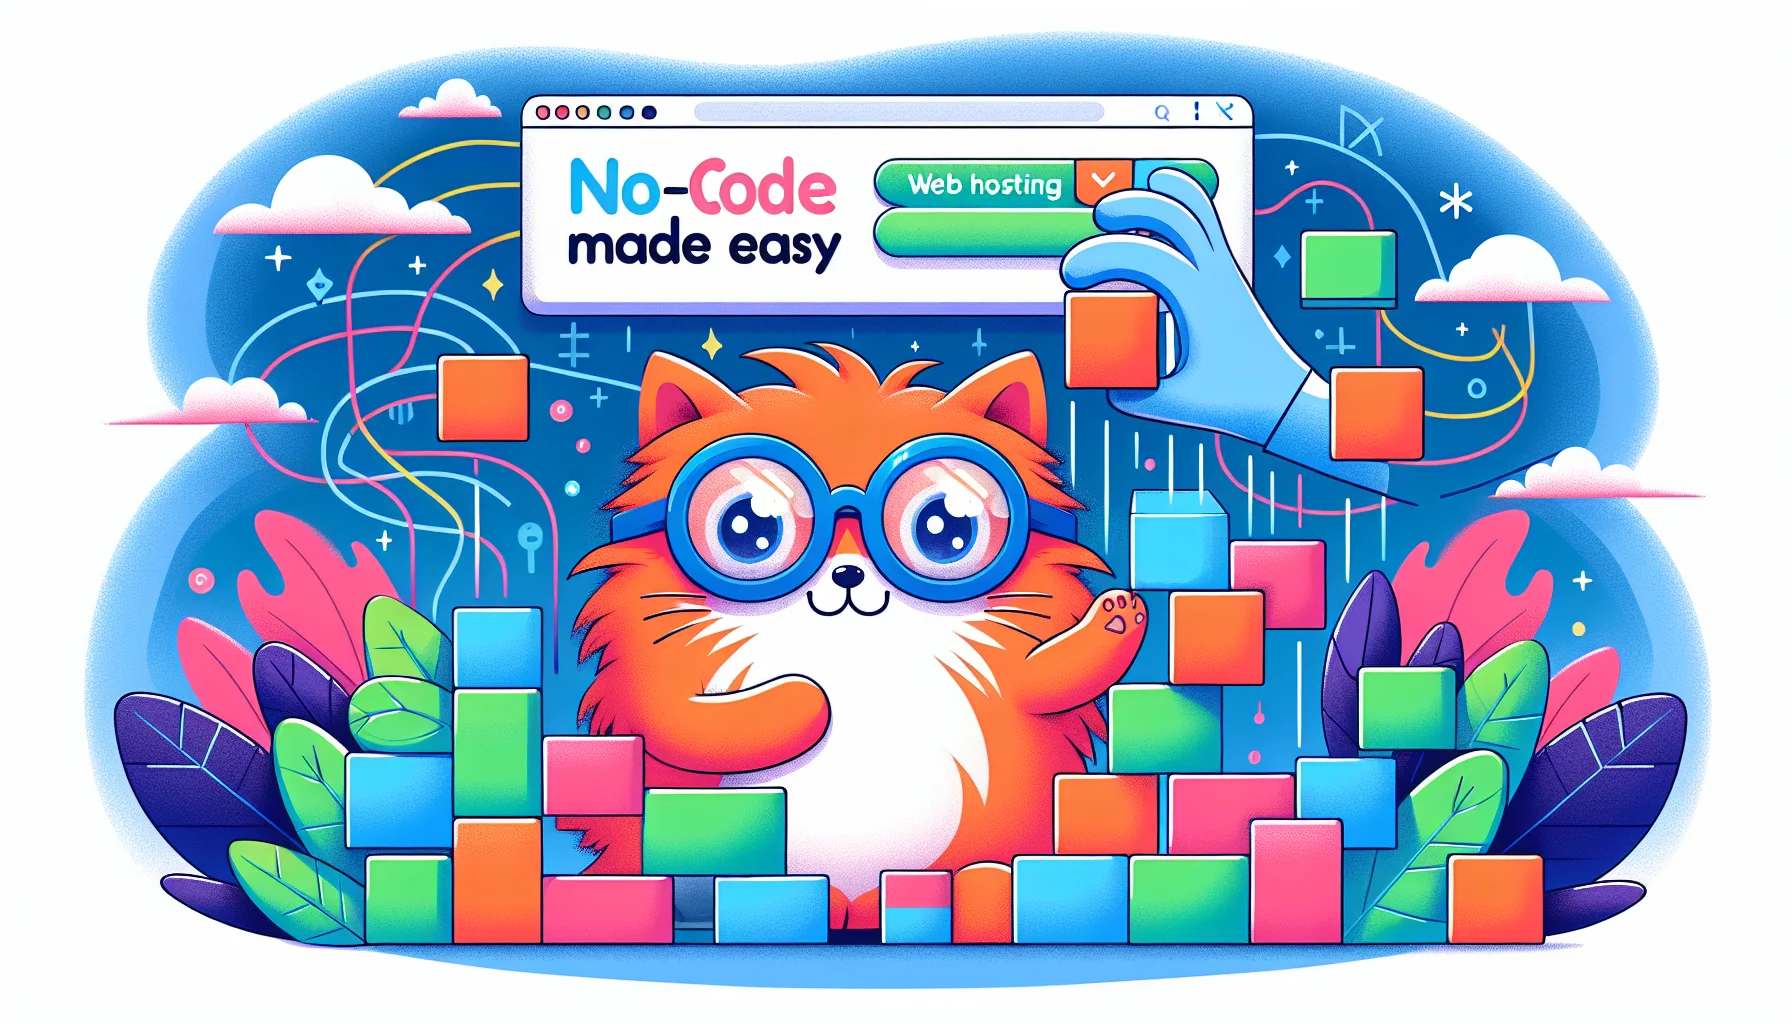 Design an amusing scenario depicting a no-code website builder. In this scenario, a light-hearted character, a fluffy orange, digital cat with glasses, is neatly arranging virtual blocks of different shades of blue and green, representing the elements of the website. A banner floats above, displaying the slogan, 'web hosting made easy', in whimsical, bright-colored letters. The background is an abstract representation of the internet world with flowing lines of data, hinting at the ease and hassle-free process of creating websites without any coding requirements.